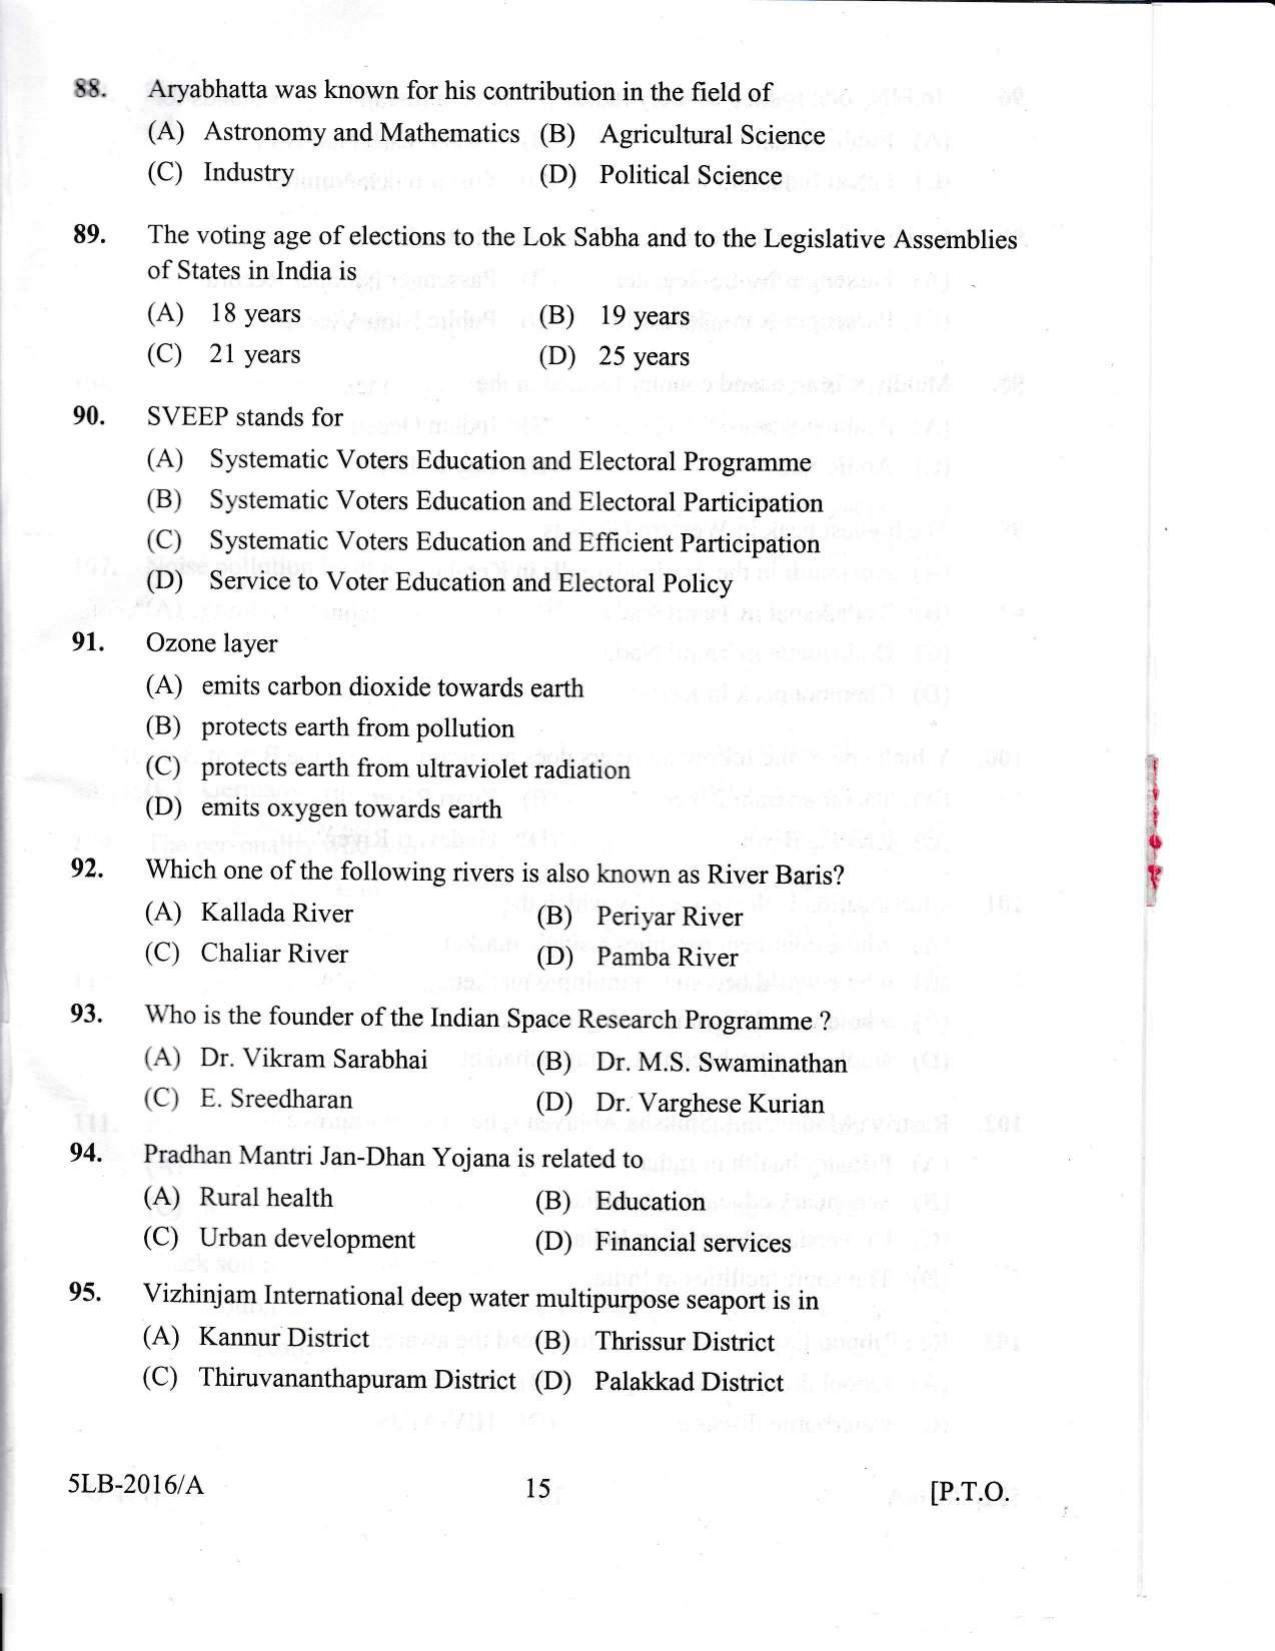 KLEE 5 Year LLB Exam 2016 Question Paper - Page 15